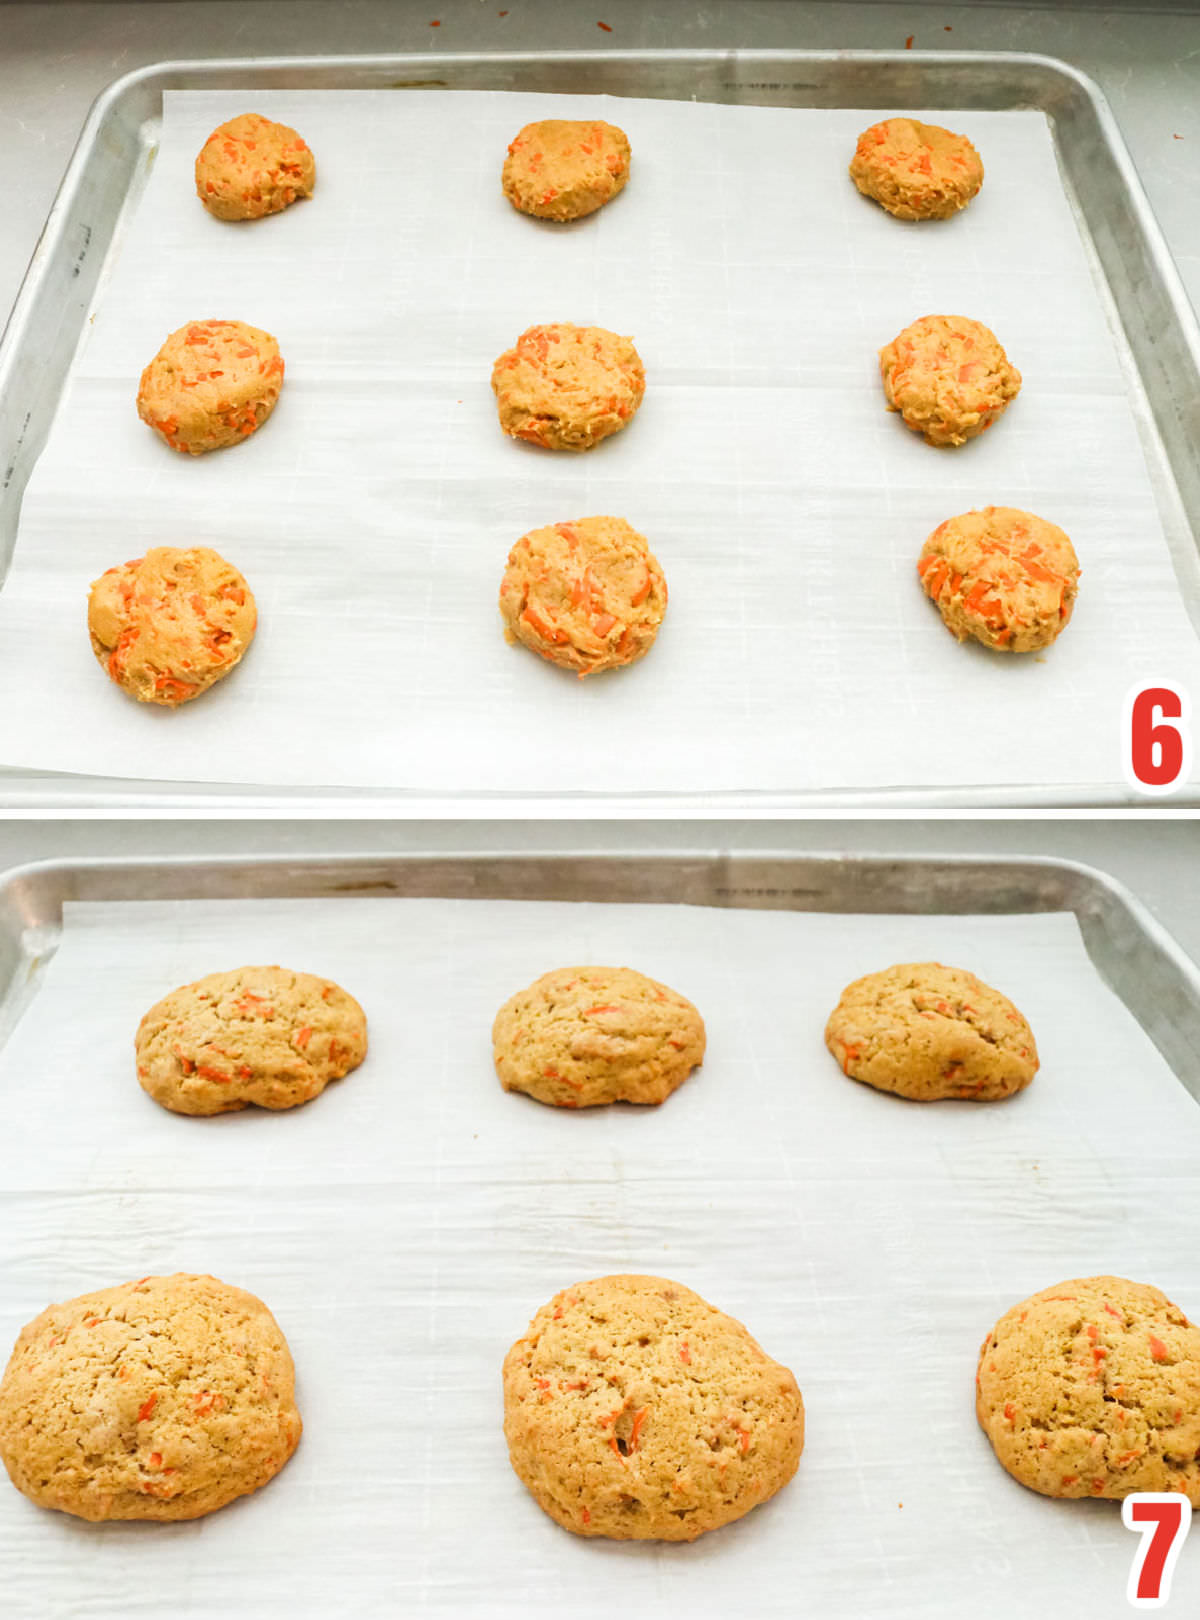 Collage image showing the carrot cake cookies before they go in the oven and after they come out of the oven.